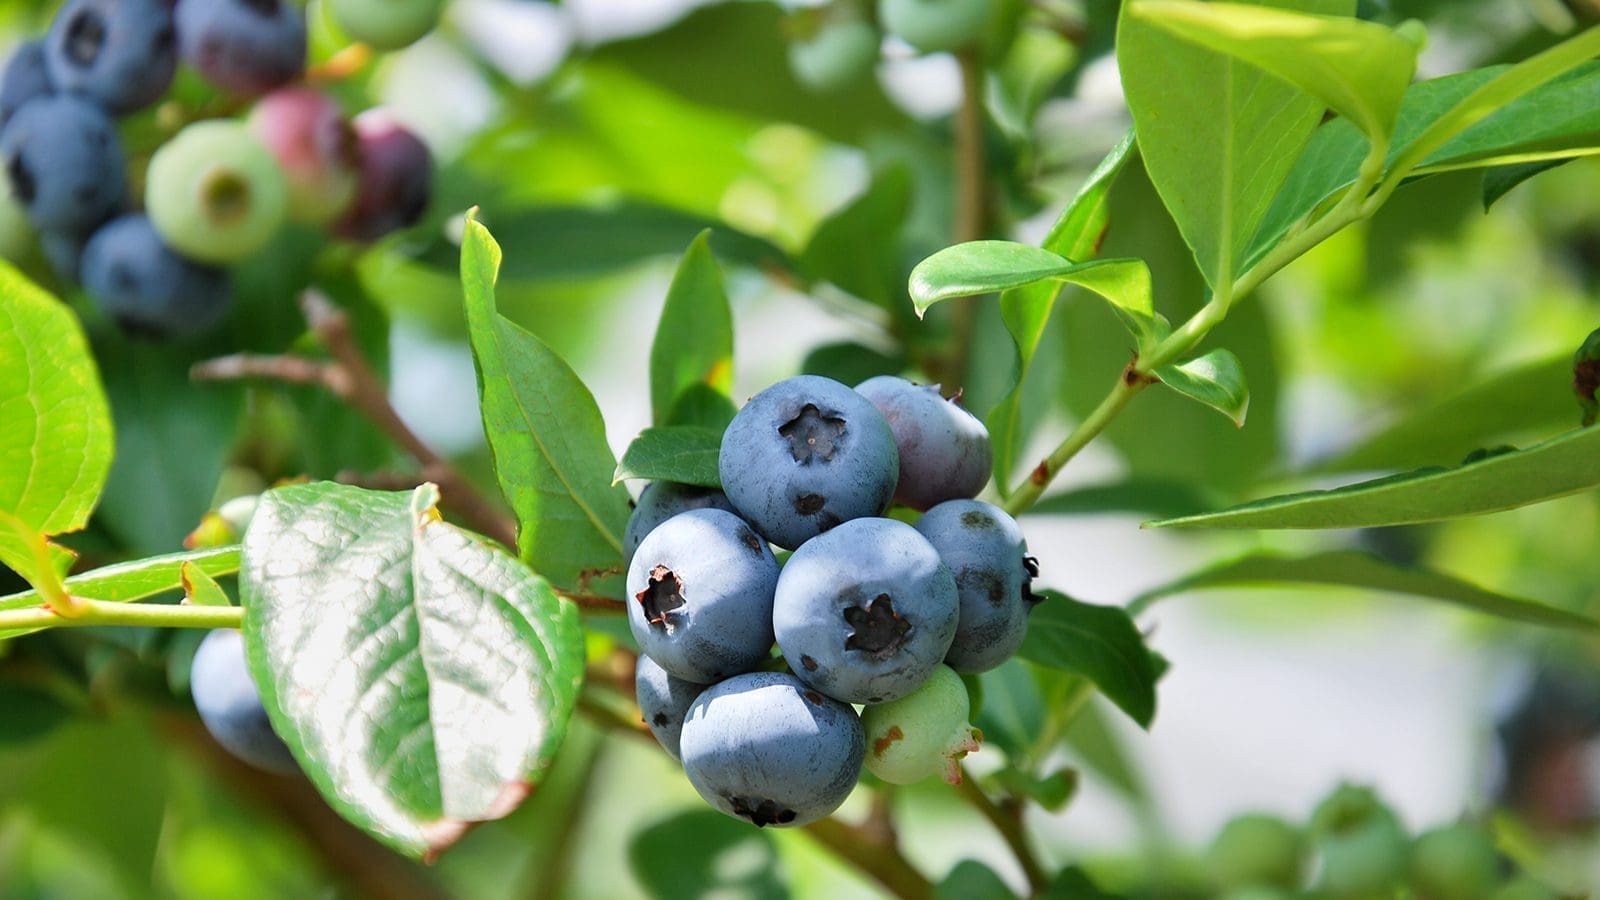 SA blueberry producer United Exports receives US$13.9m from IFC, FMO to strengthen sustainable production